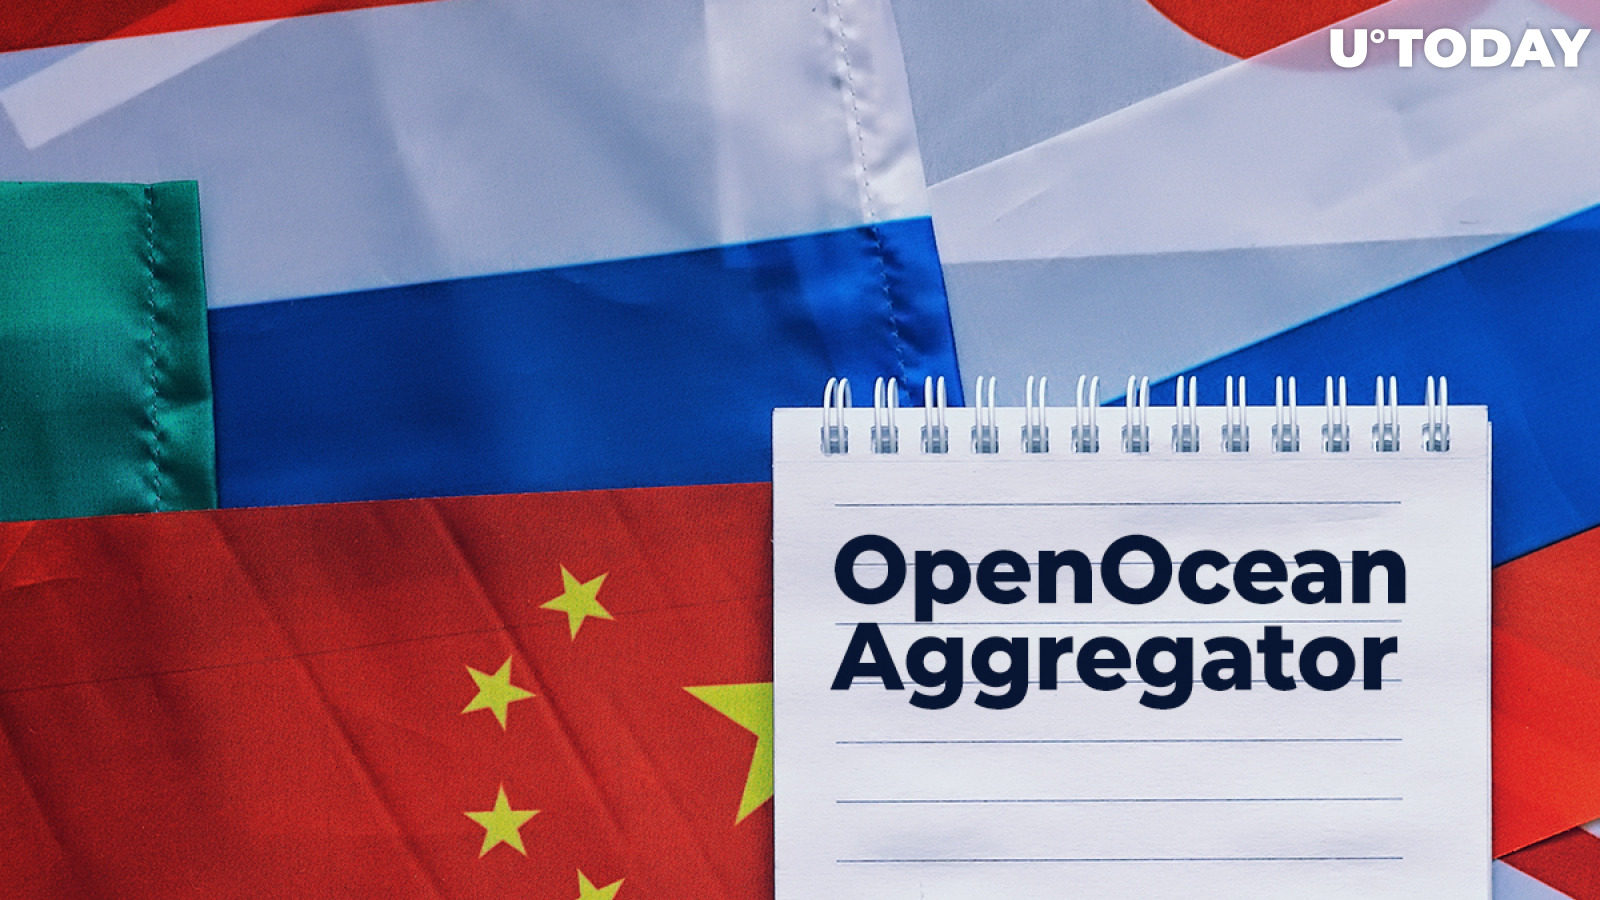 OpenOcean (OOE) Aggregator Launches Chinese, Spanish, Japanese and Russian Versions